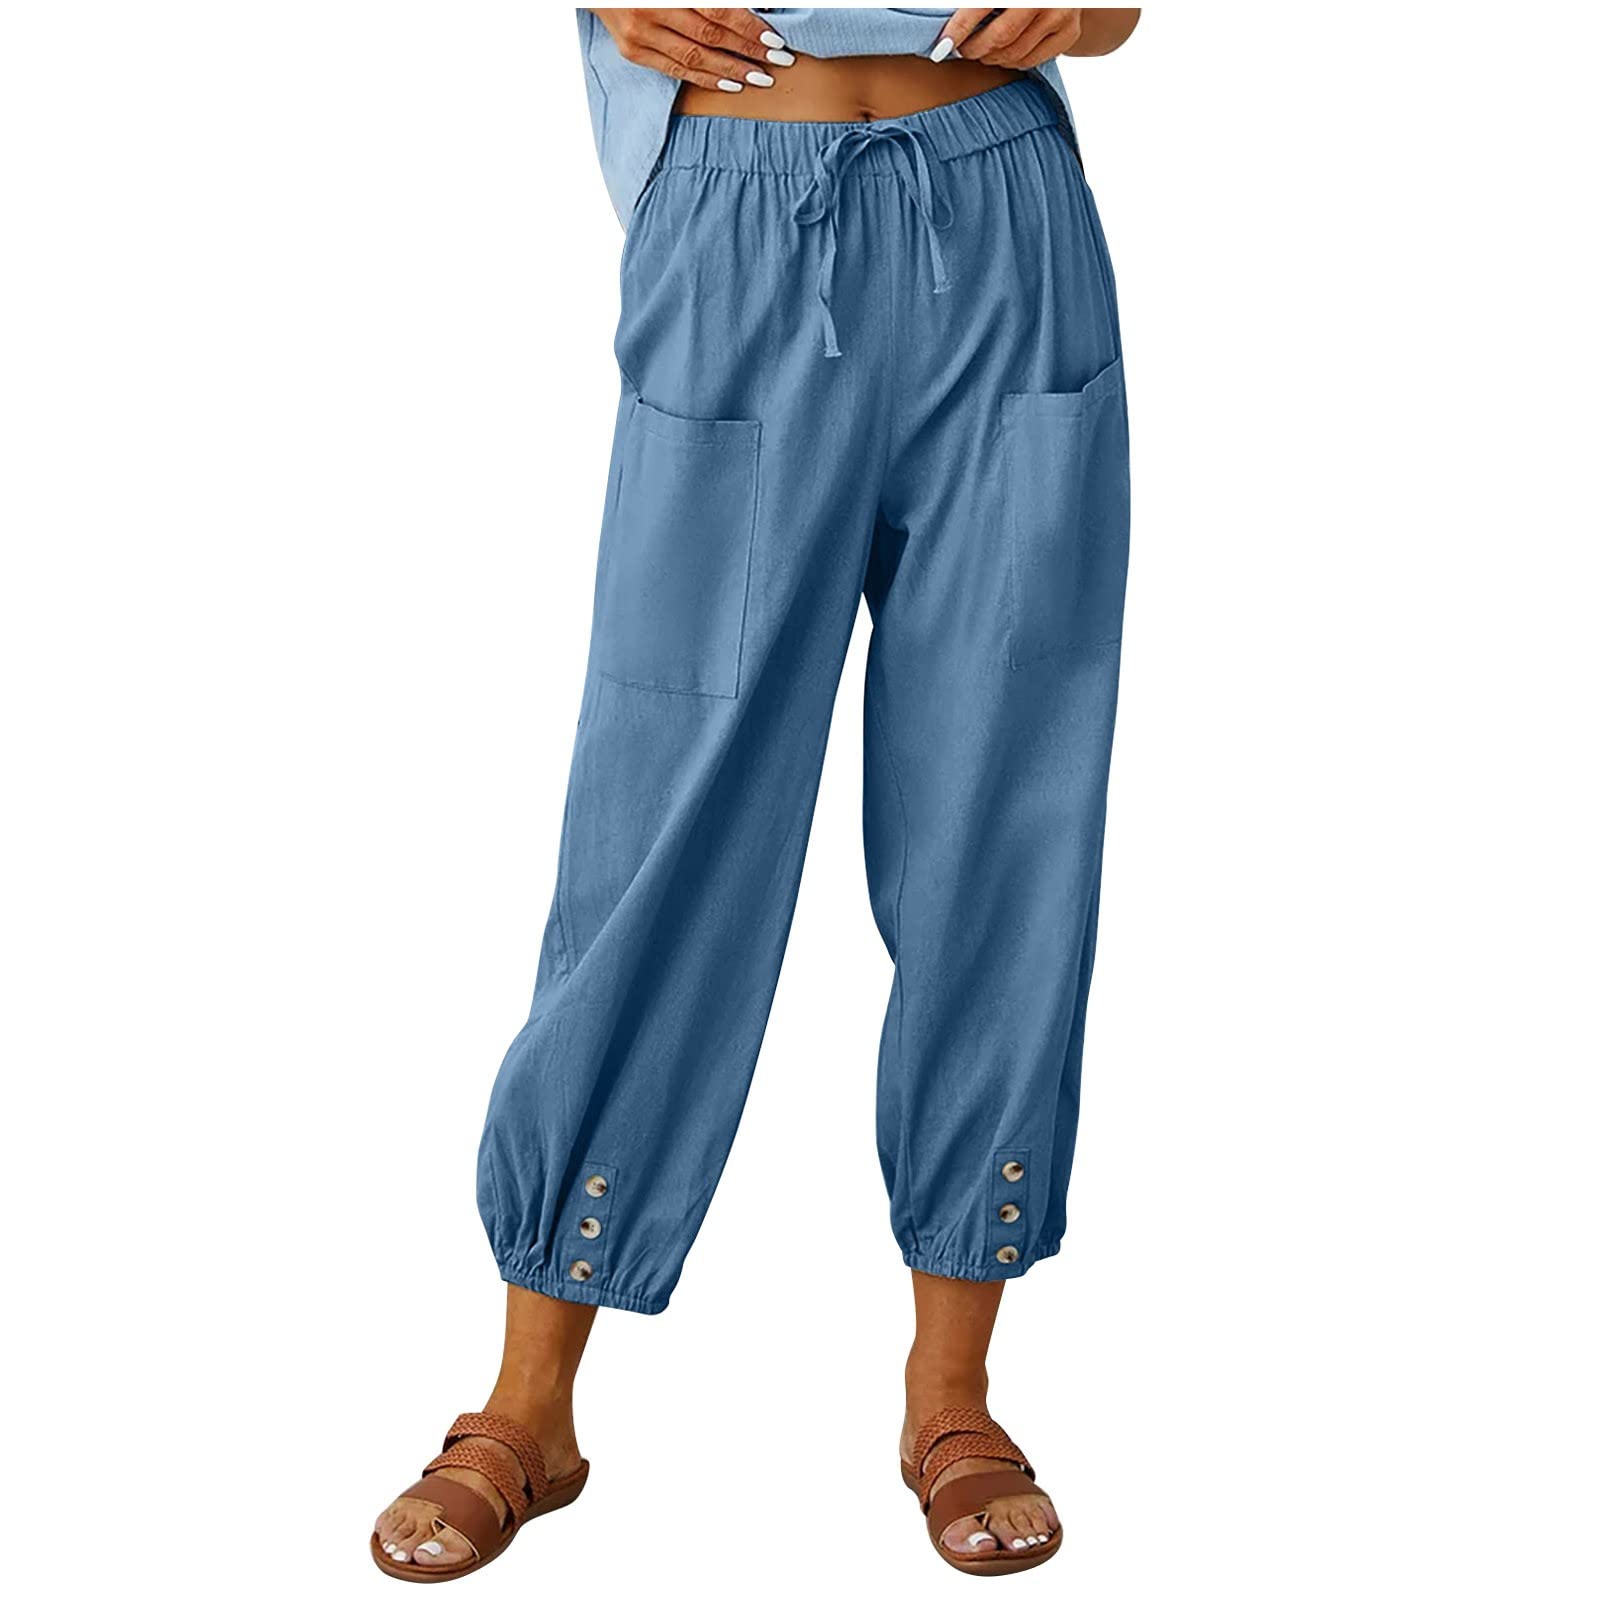 WOMEN'S COTTON BAGGY TROUSERS | UNIQLO IN